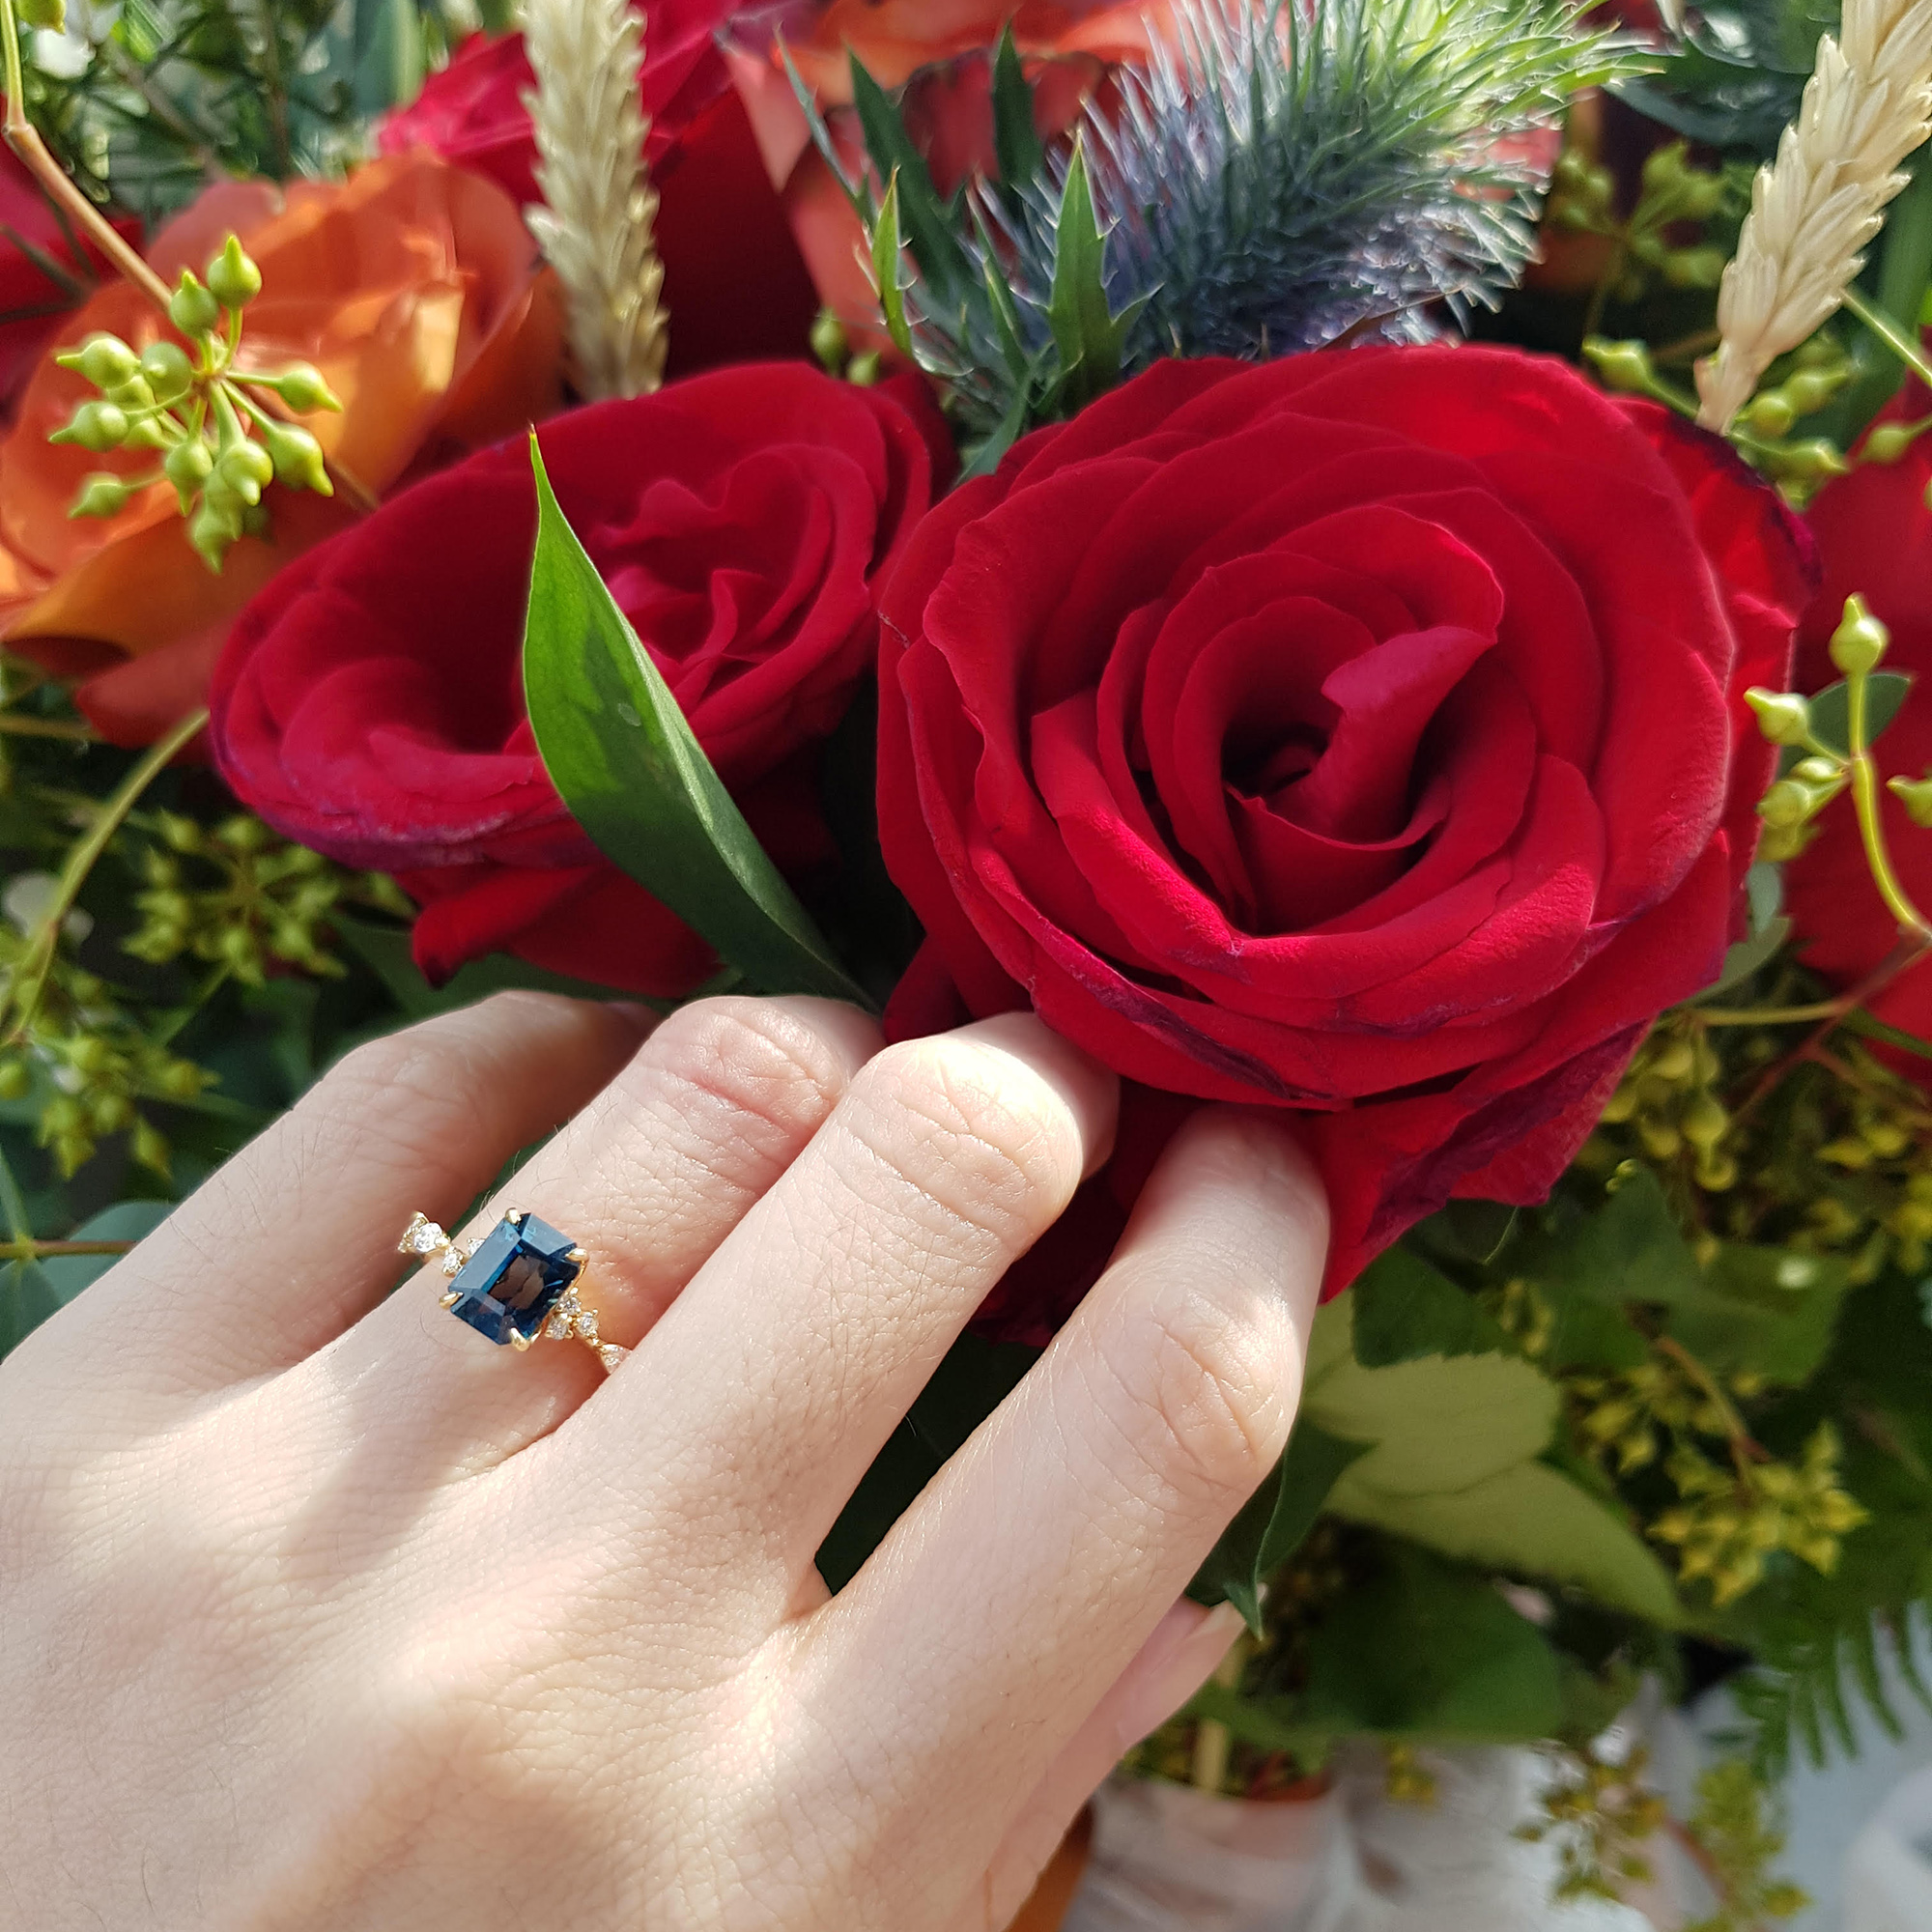 “When two become one” – Custom Made Engagement Rings with Calla Lily